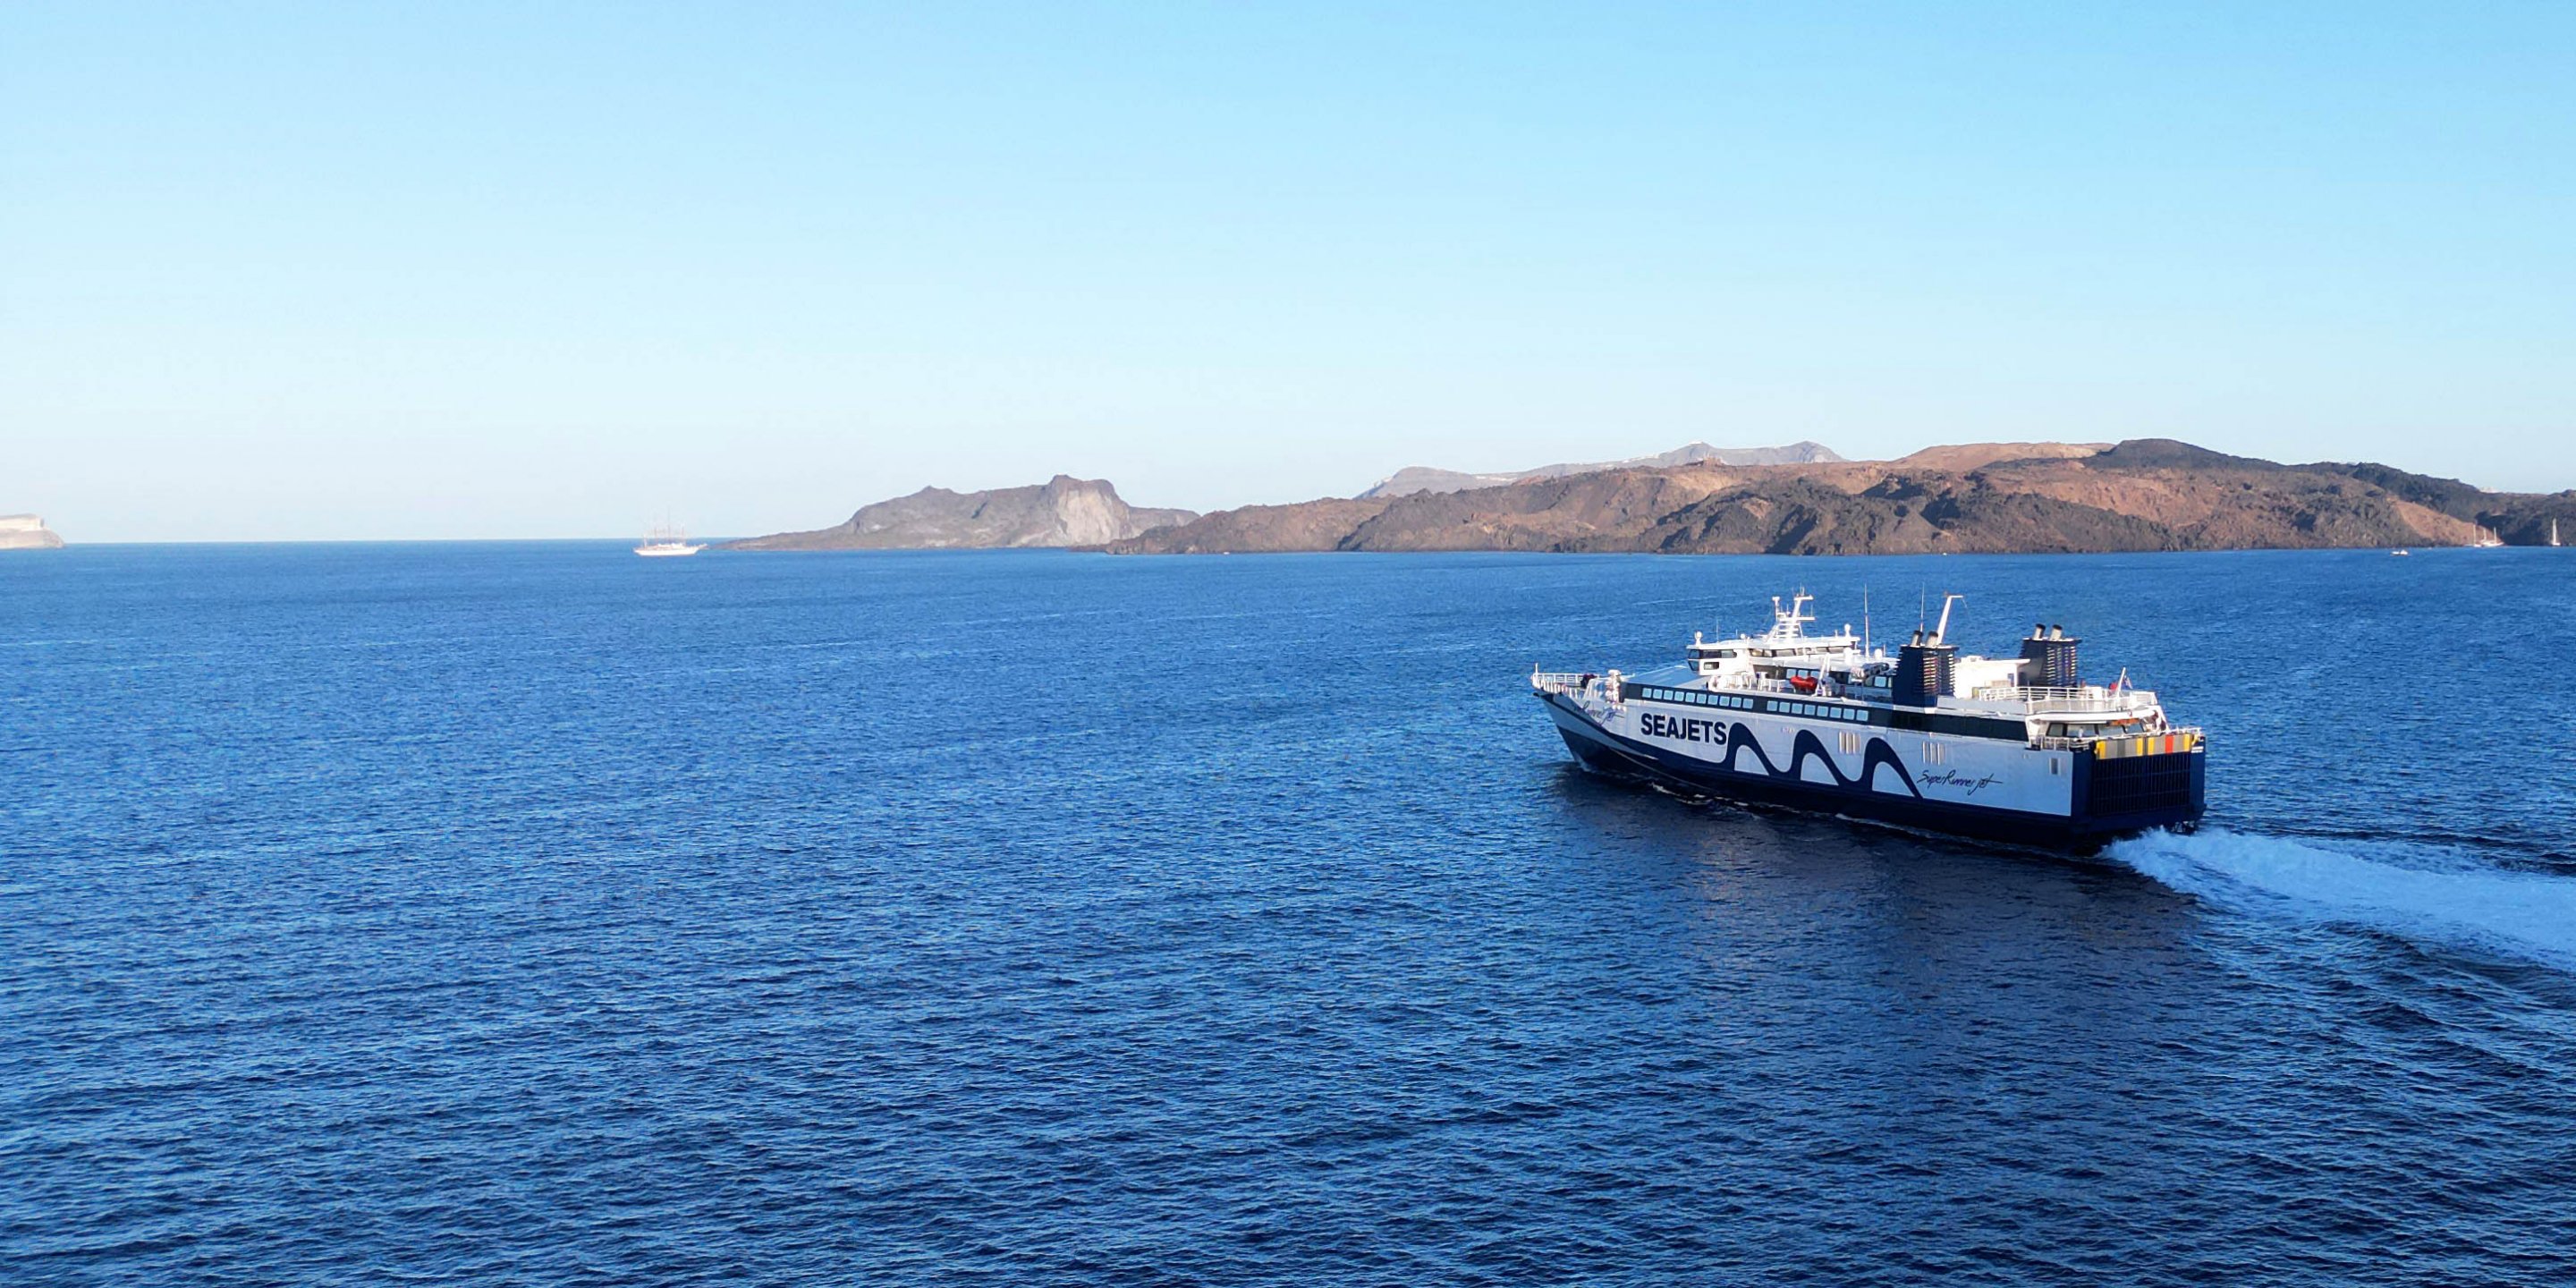 The ferry Super Runner of Seajets going from Santorini to Ios and passing by the famous volcano